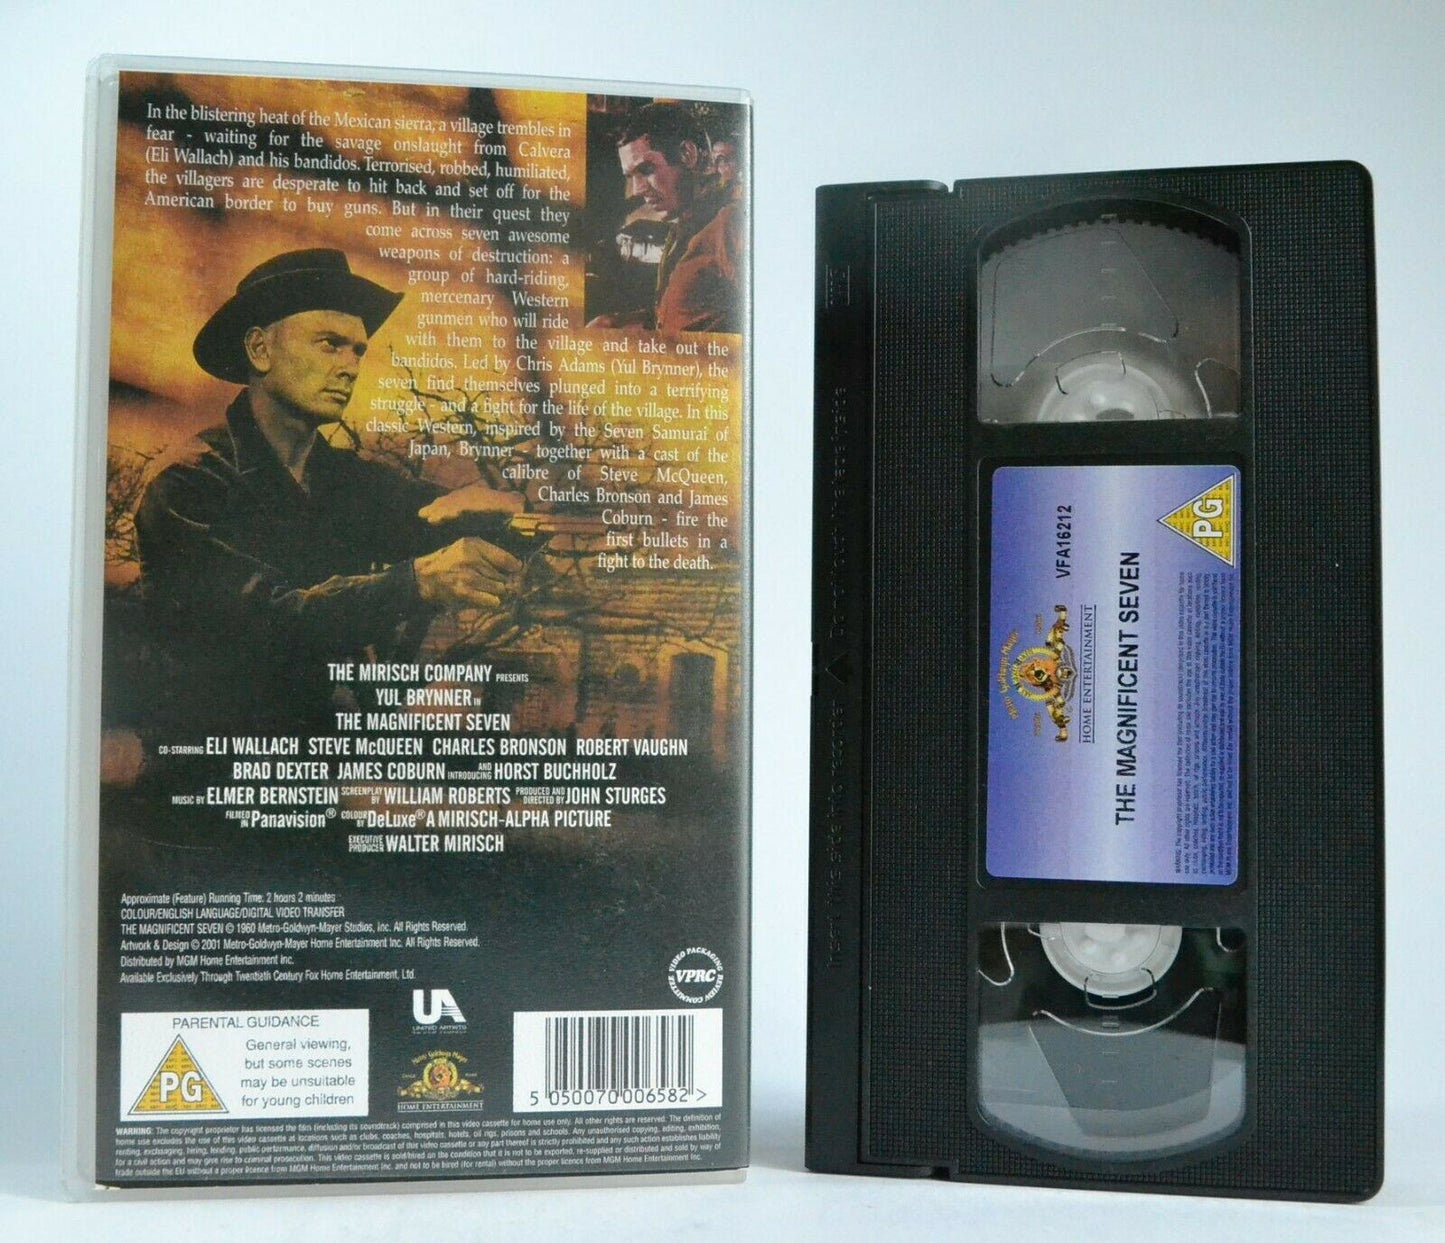 The Magnificent Seven (1960) - Western - Steve McQueen/Charles Bronson - Pal VHS-